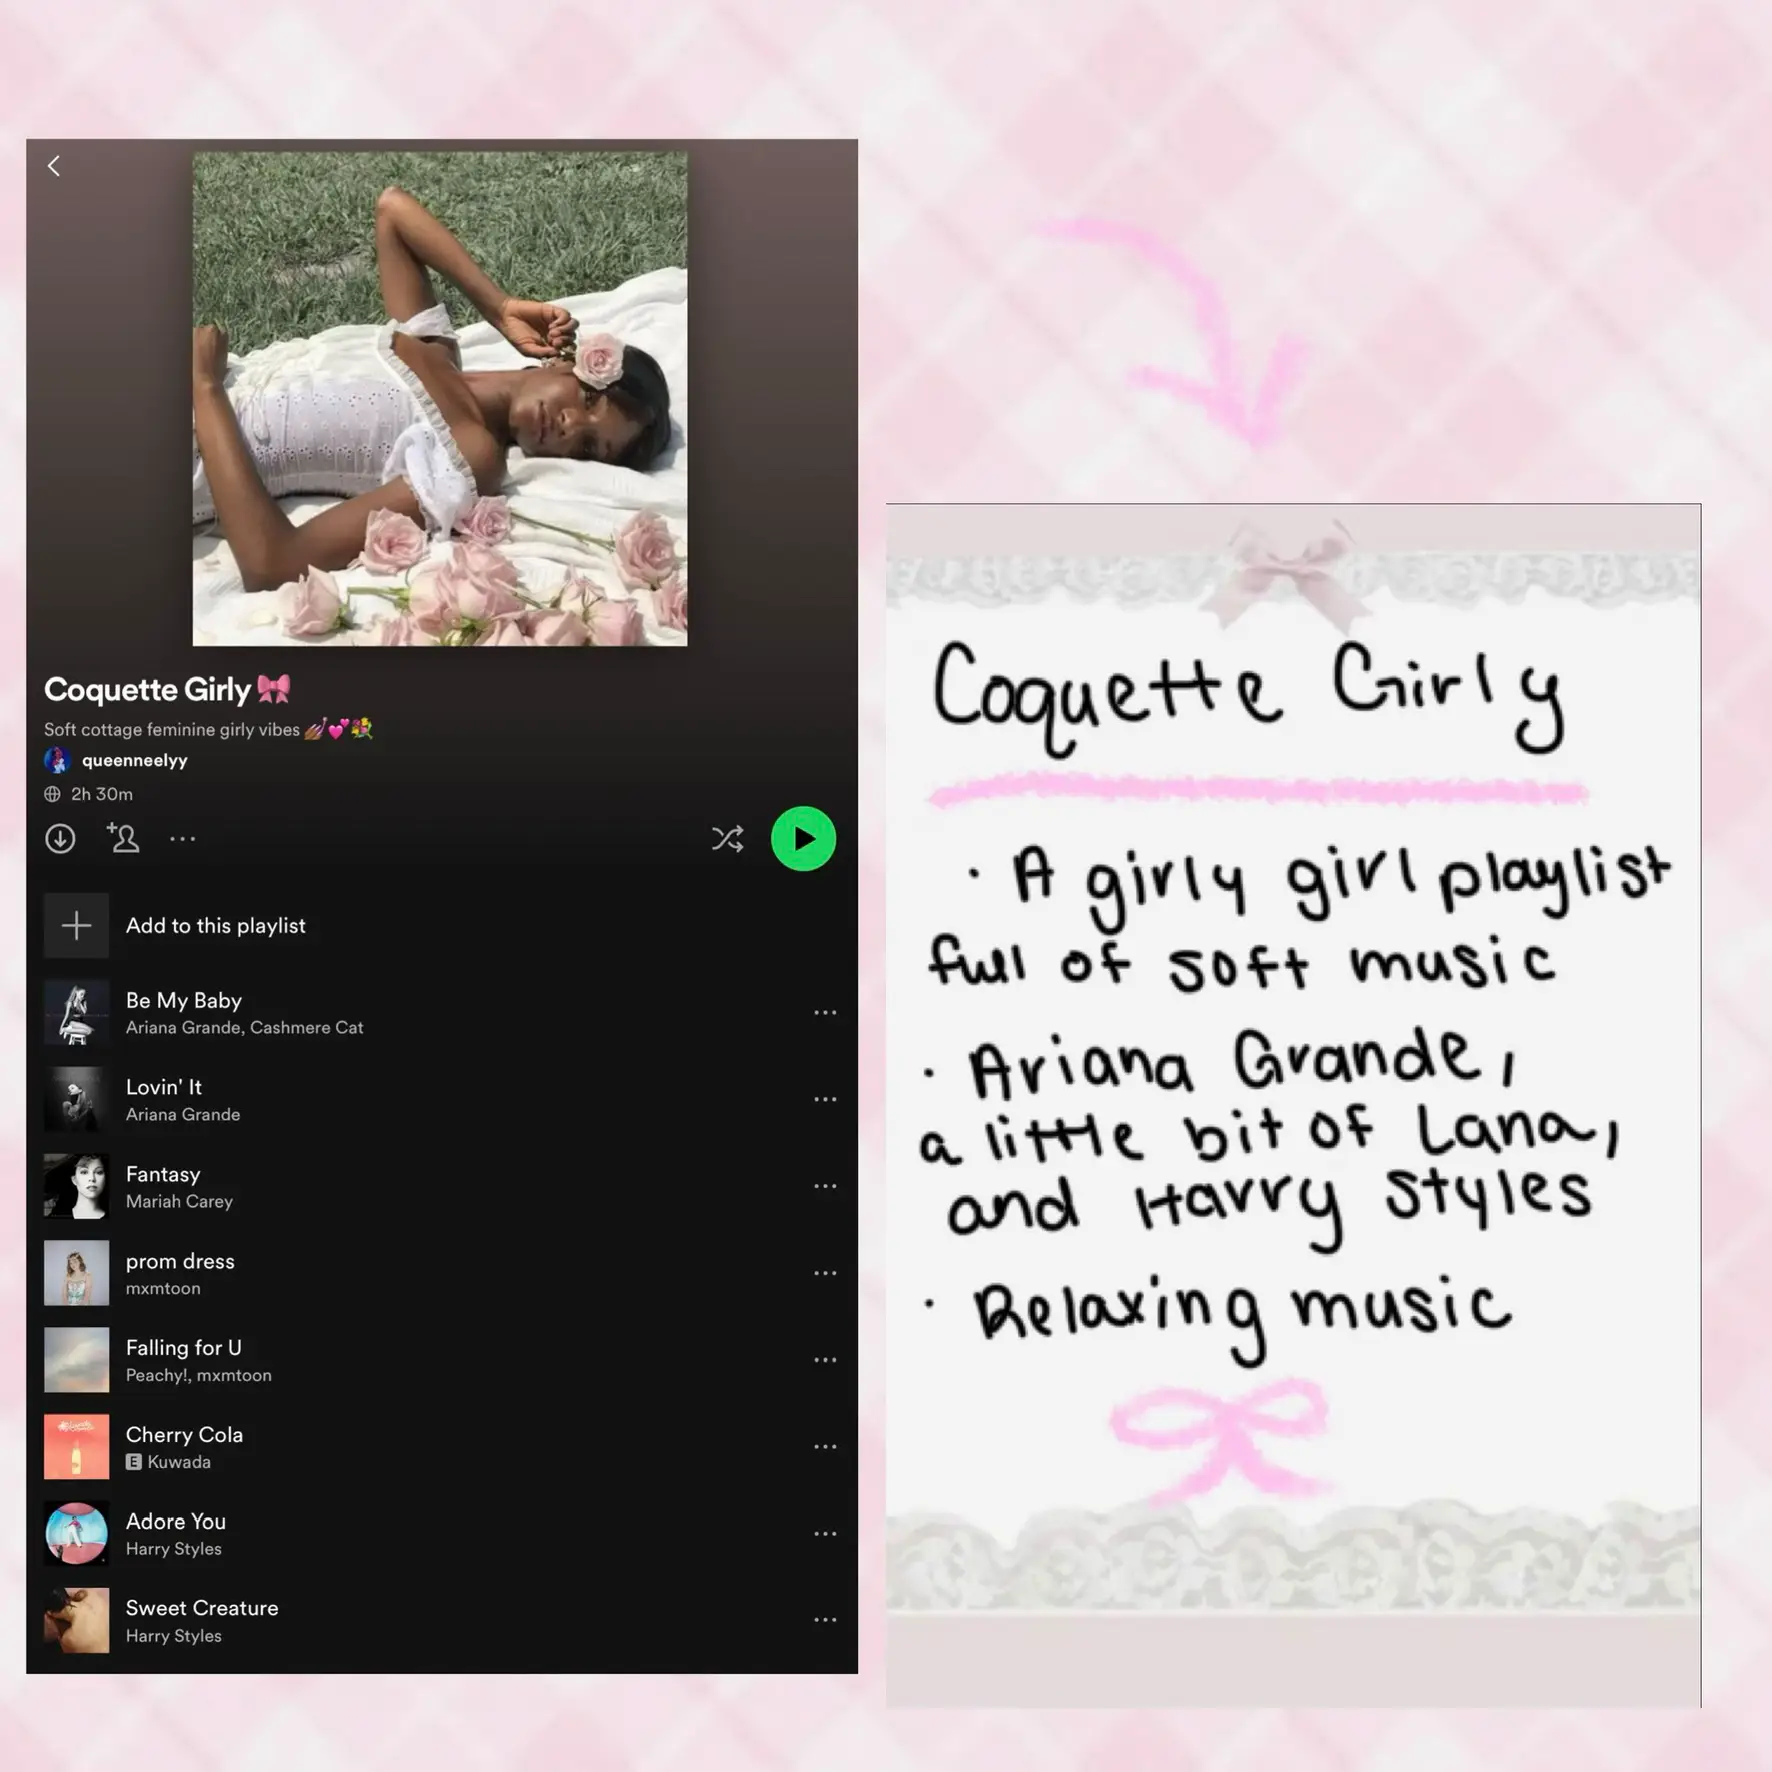  A woman is laying on a bed with a playlist of music playing on a tablet. The playlist includes Ariana Grande, Cashmere Cat, and Harry Styles.